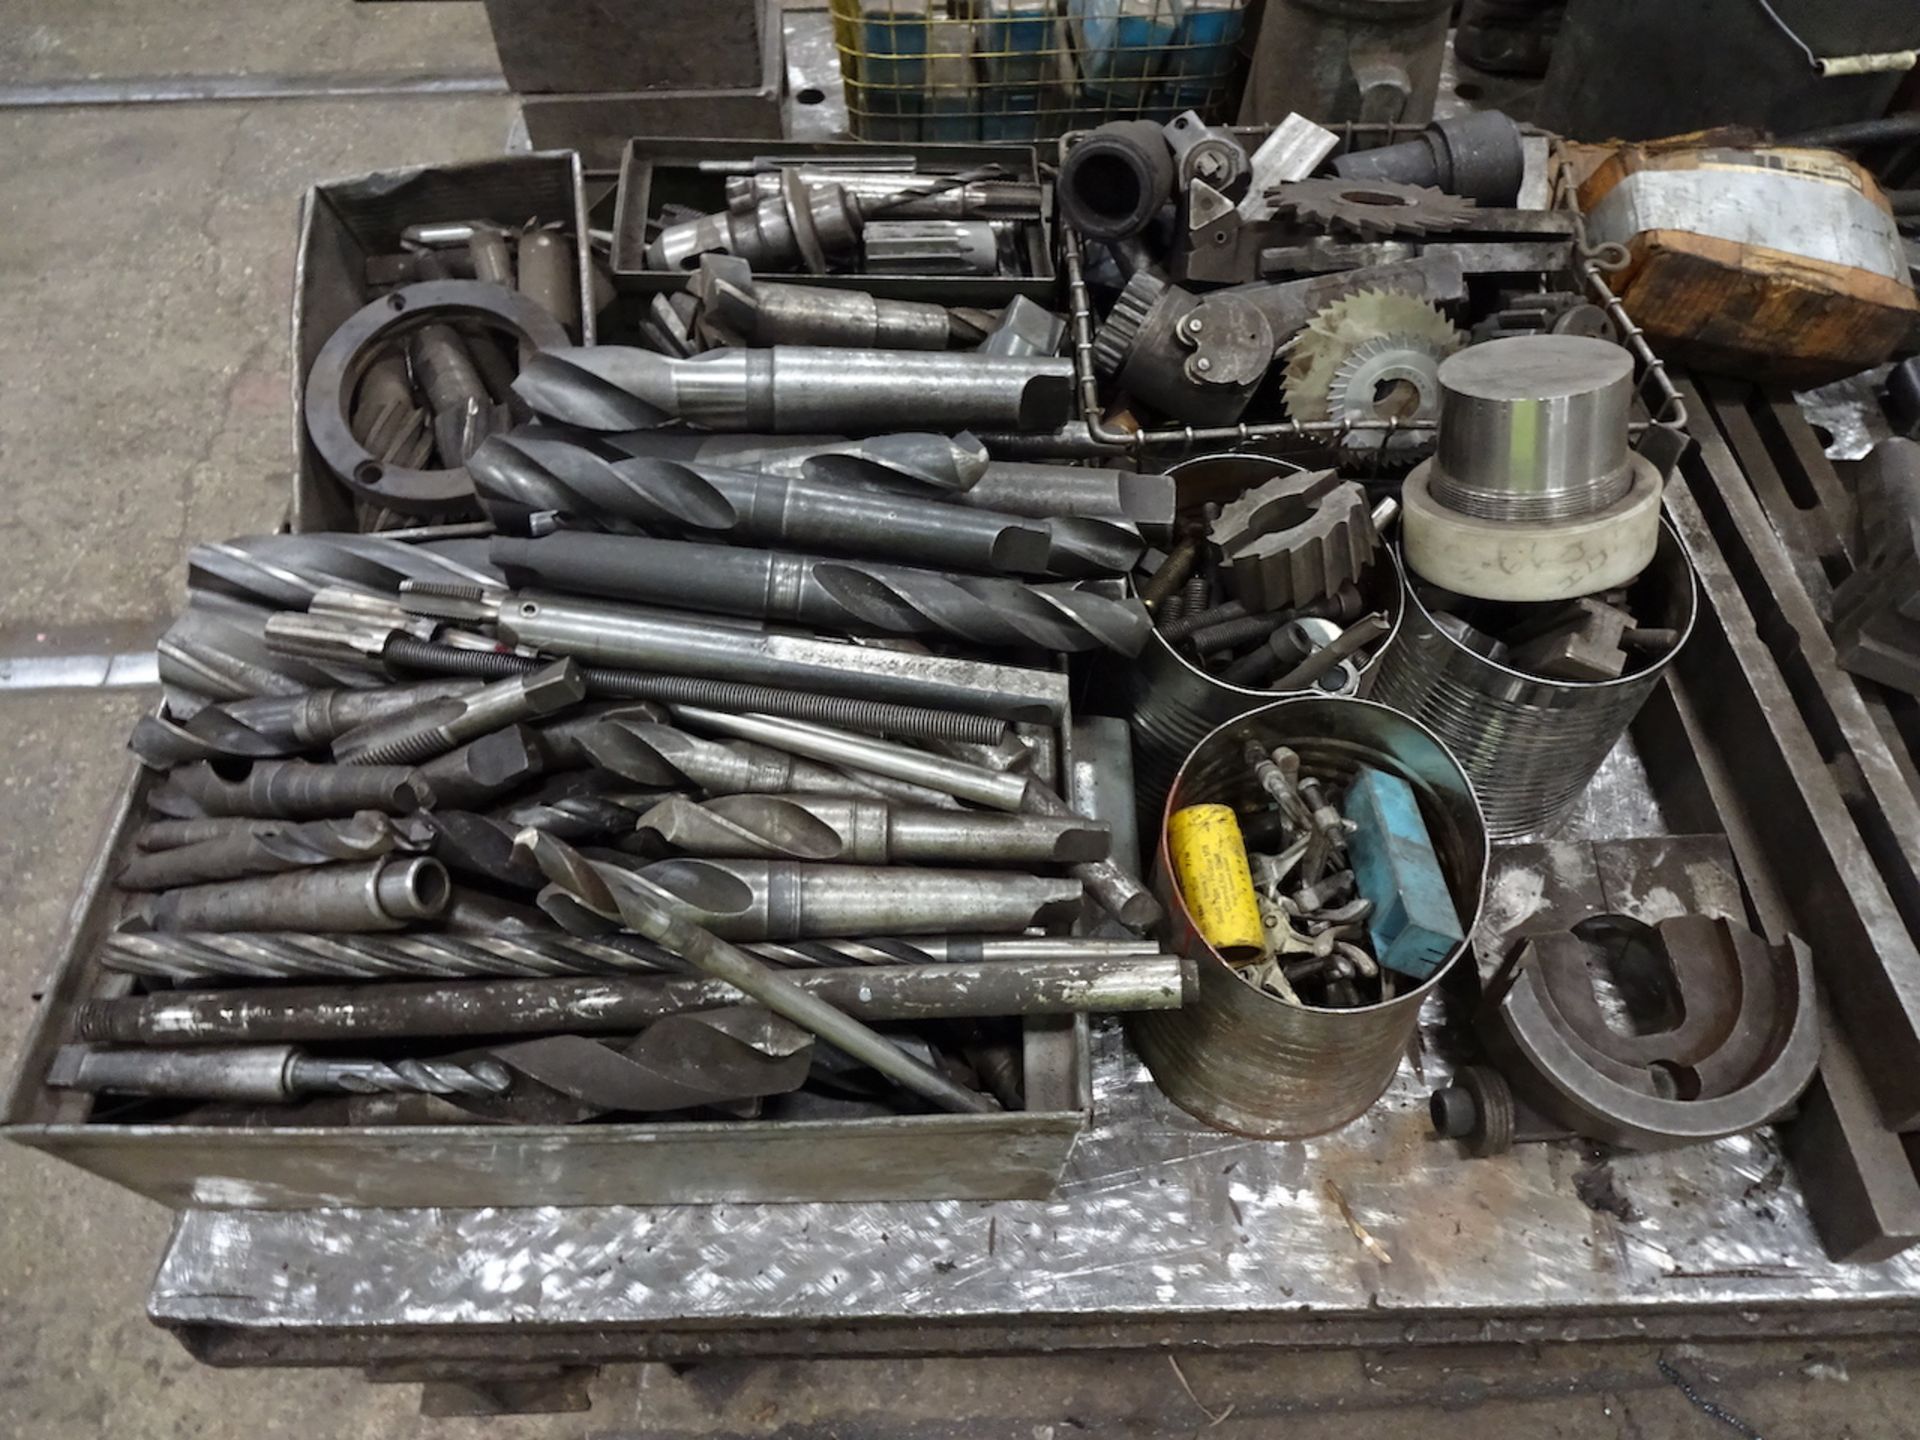 LOT: Assorted Tooling including Drill Bits, Arbors, Tool Holders, etc. - Image 2 of 2